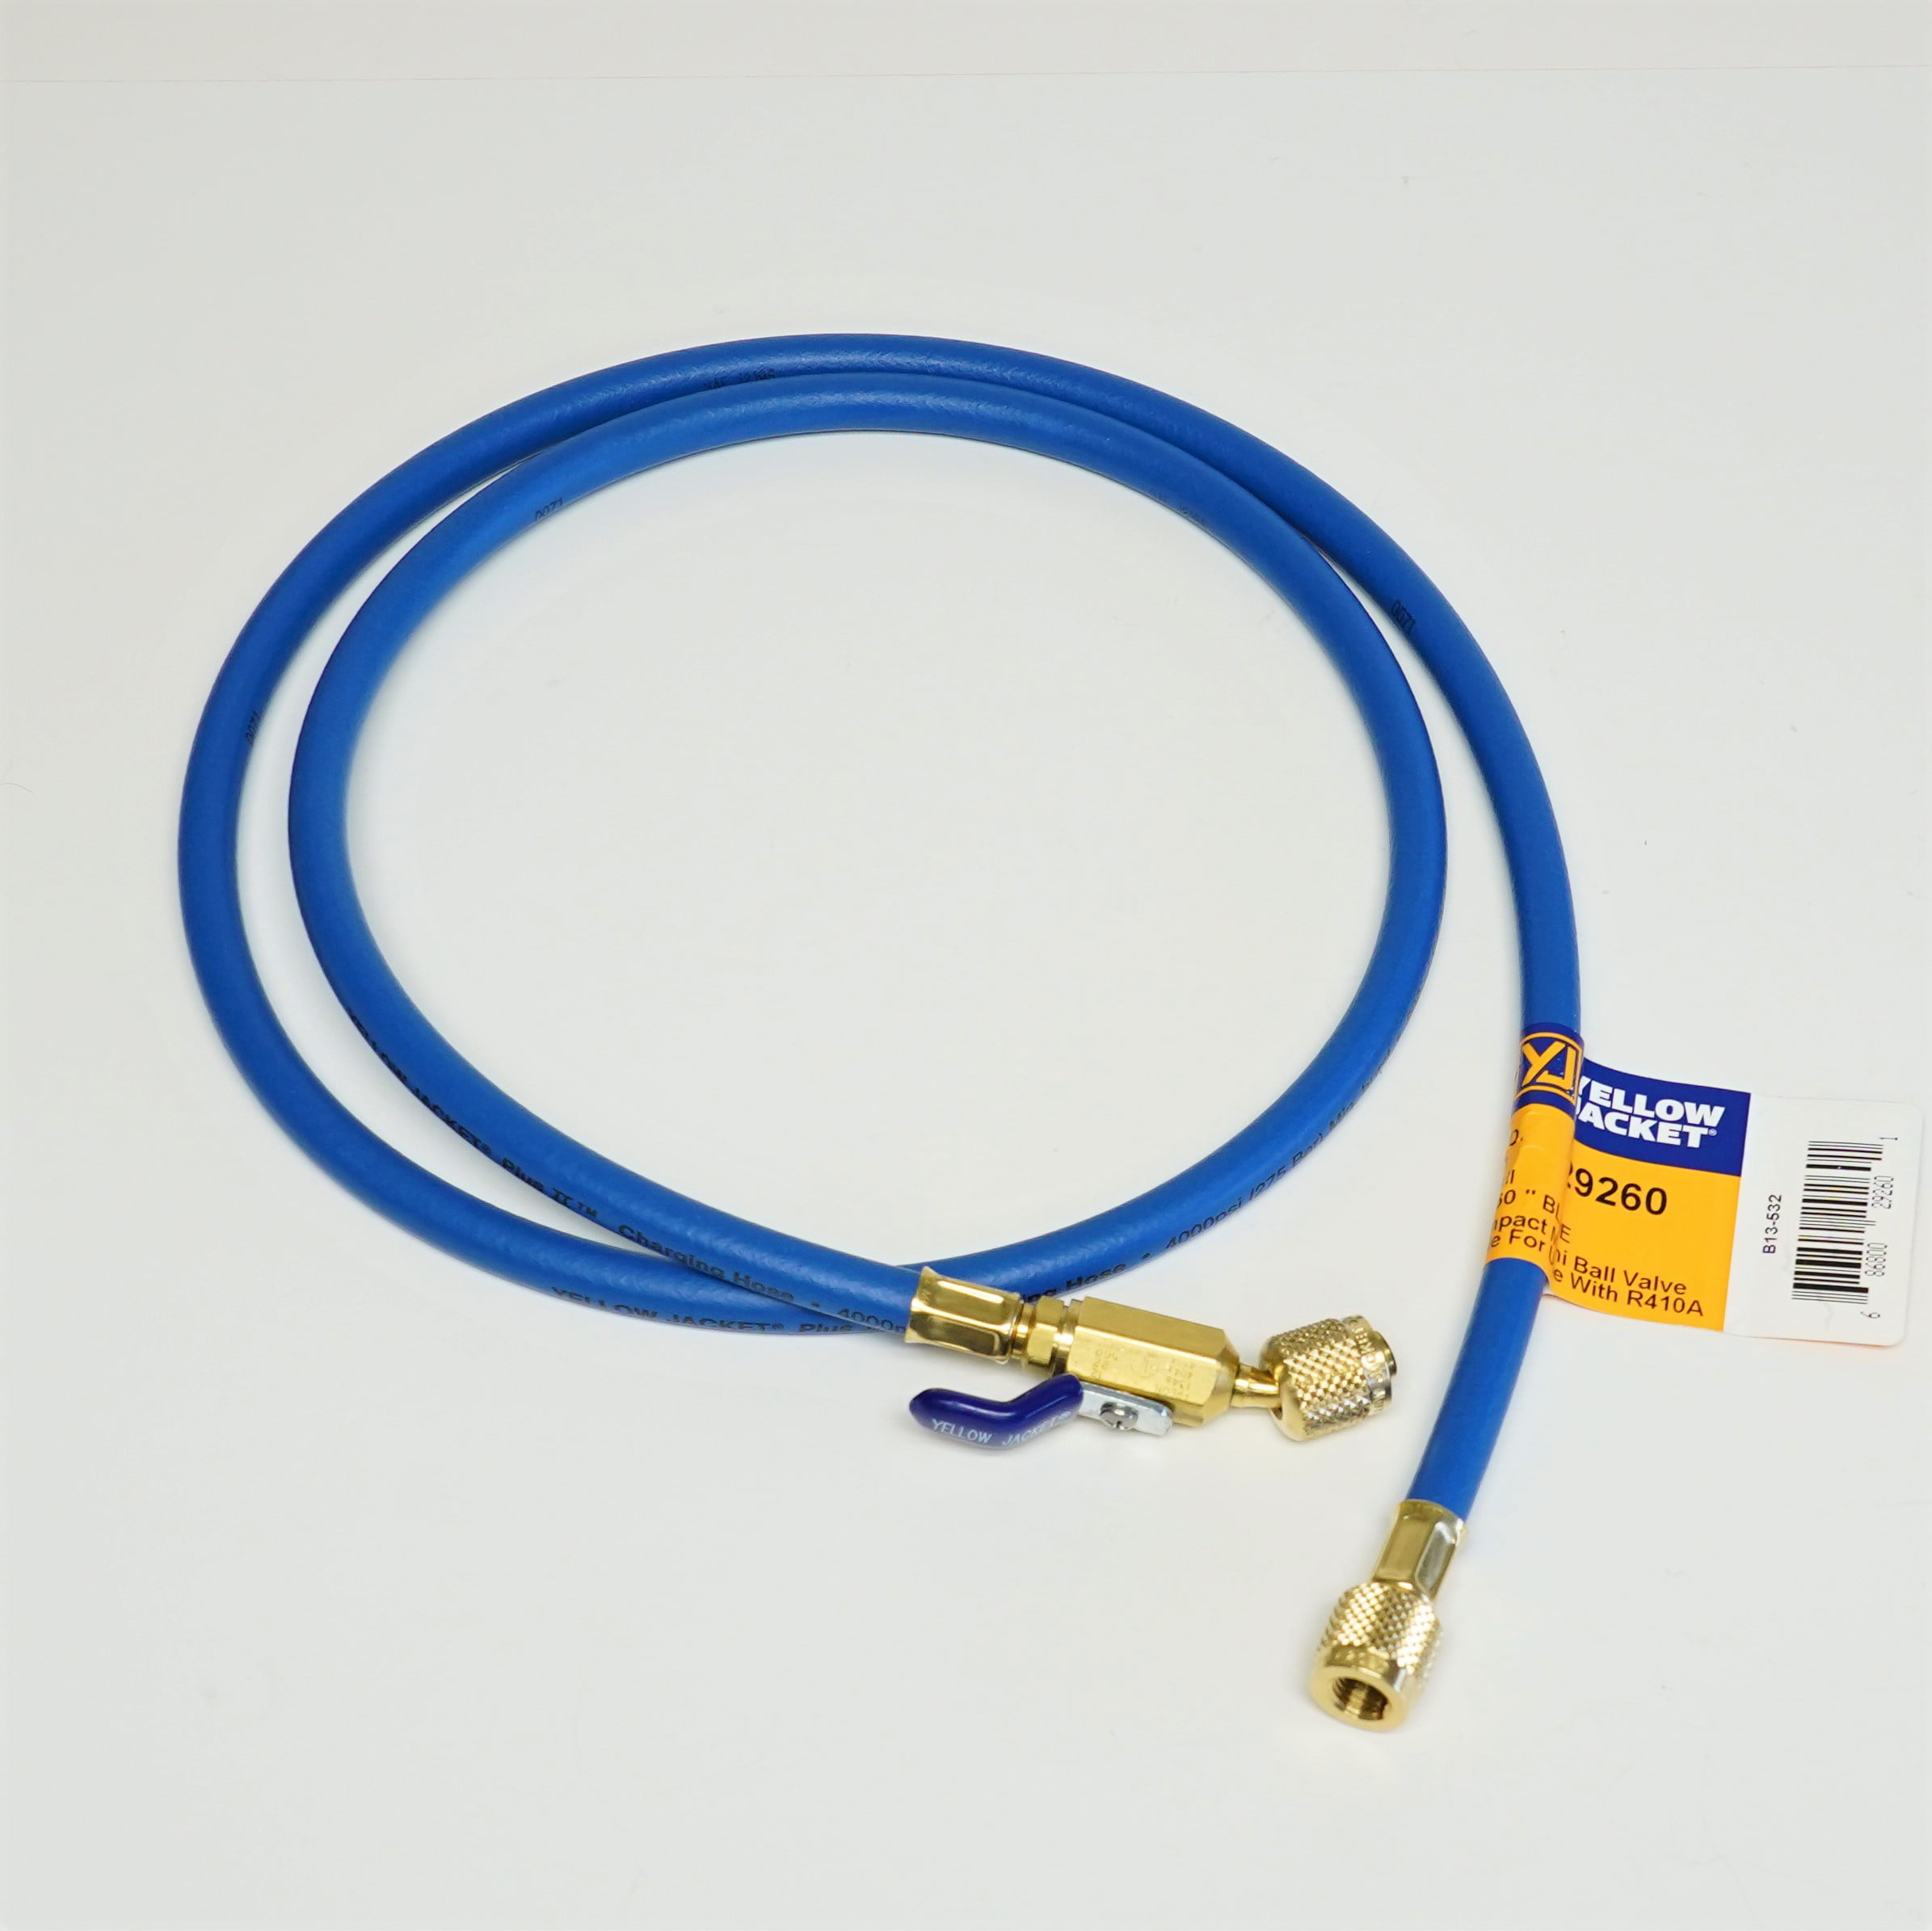 Yellow Jacket 15060 Plus II 1/4" Heavy Duty HCA Straight X Angle Charging Hose for sale online 